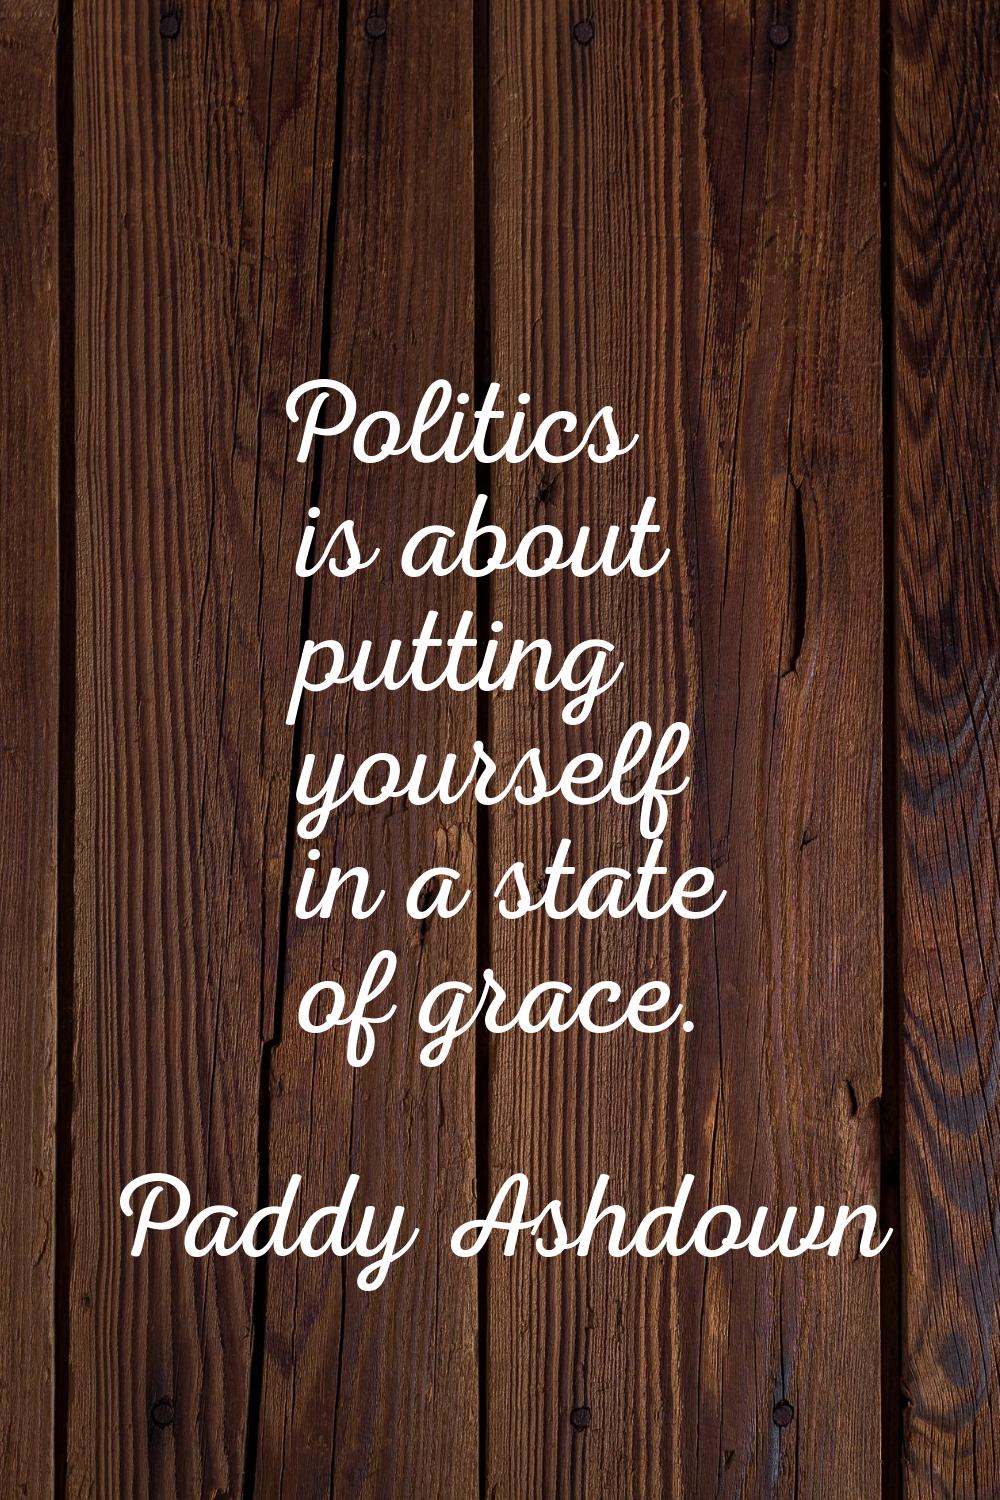 Politics is about putting yourself in a state of grace.